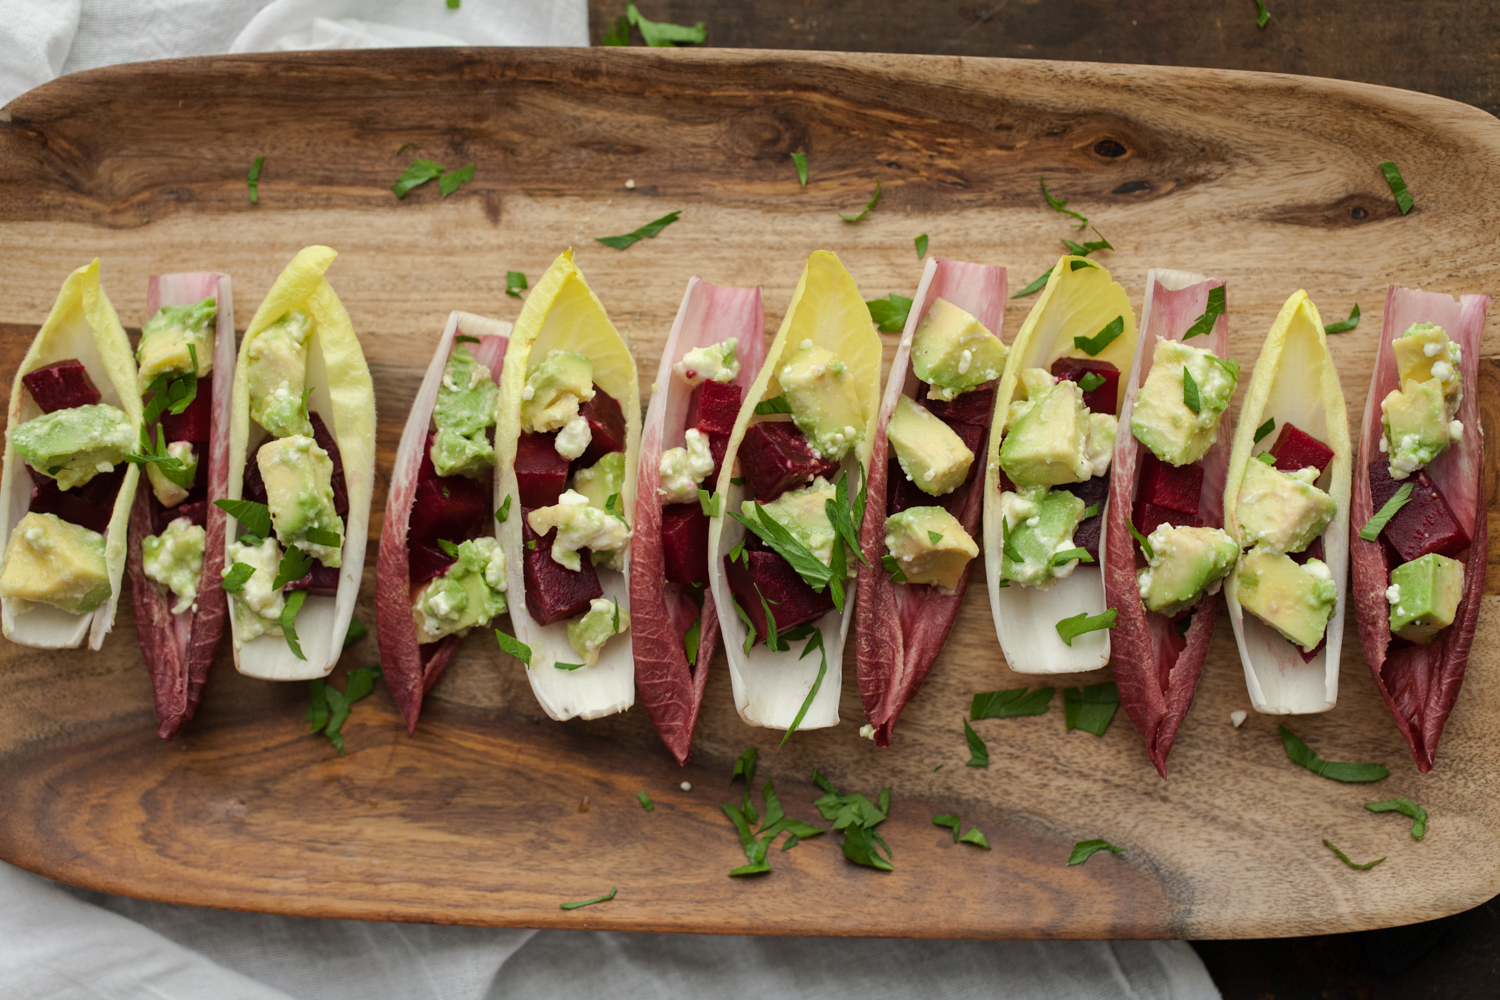 Endives with Roasted Beet and Avocado